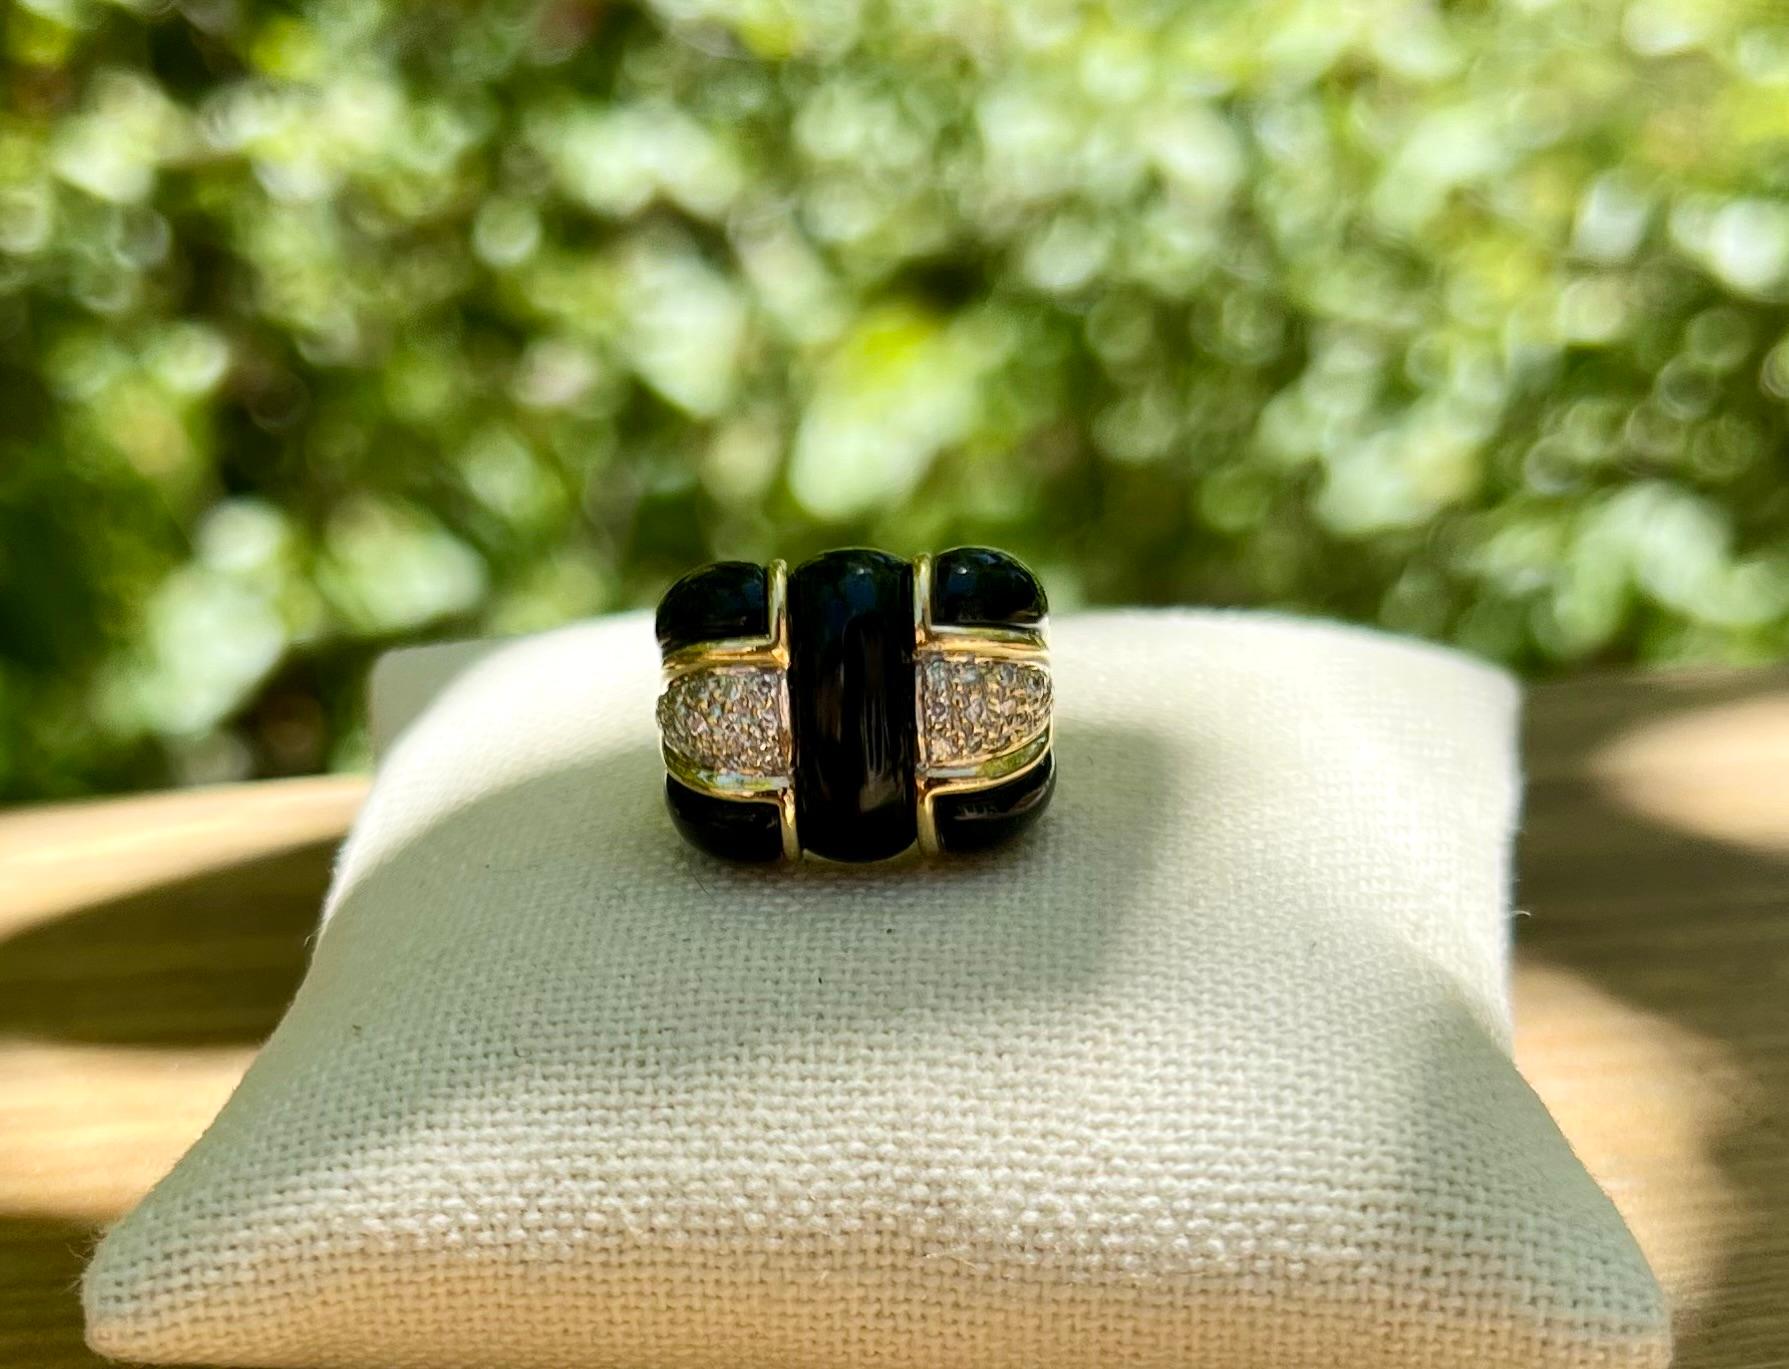 One 18 karat yellow gold (stamped 18K) custom carved onyx and diamond ring, set with thirty brilliant-cut diamonds, approximately 0.20 carat total weight with matching I/J color and SI1 clarity.  The ring is a finger size 8.

*Center stone is a bit